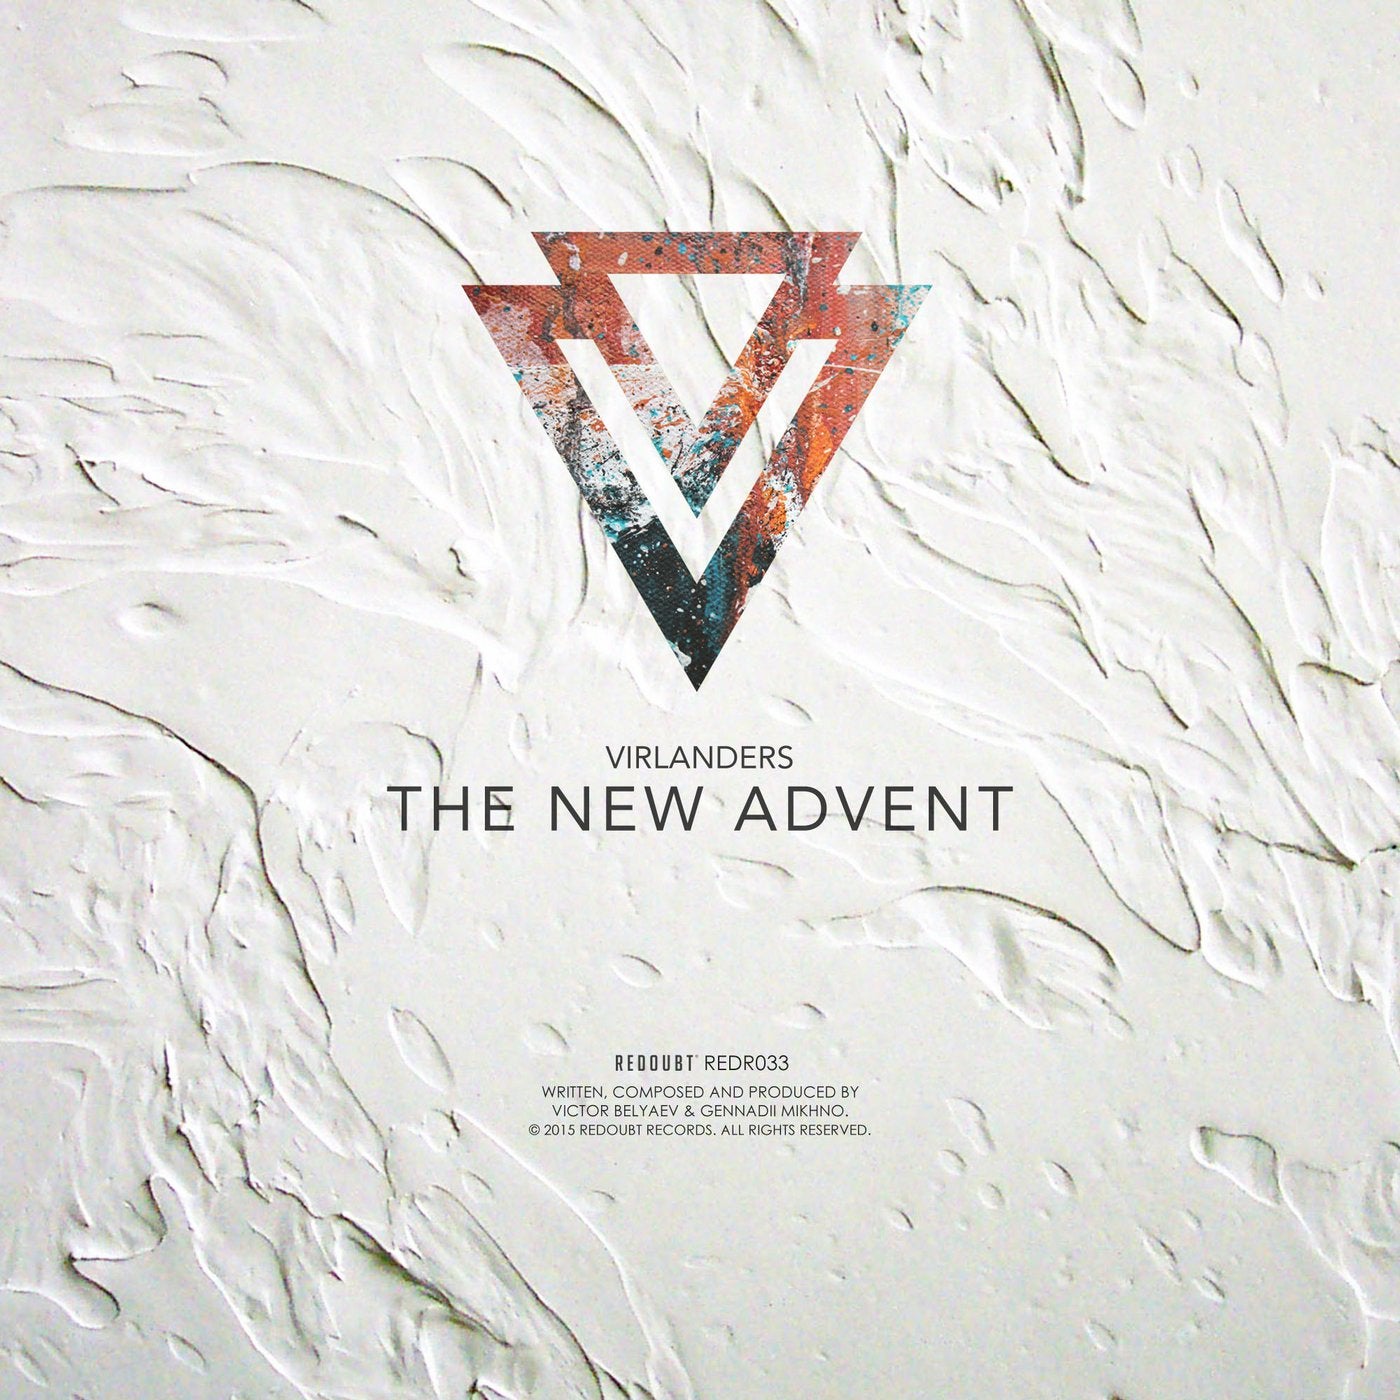 The New Advent